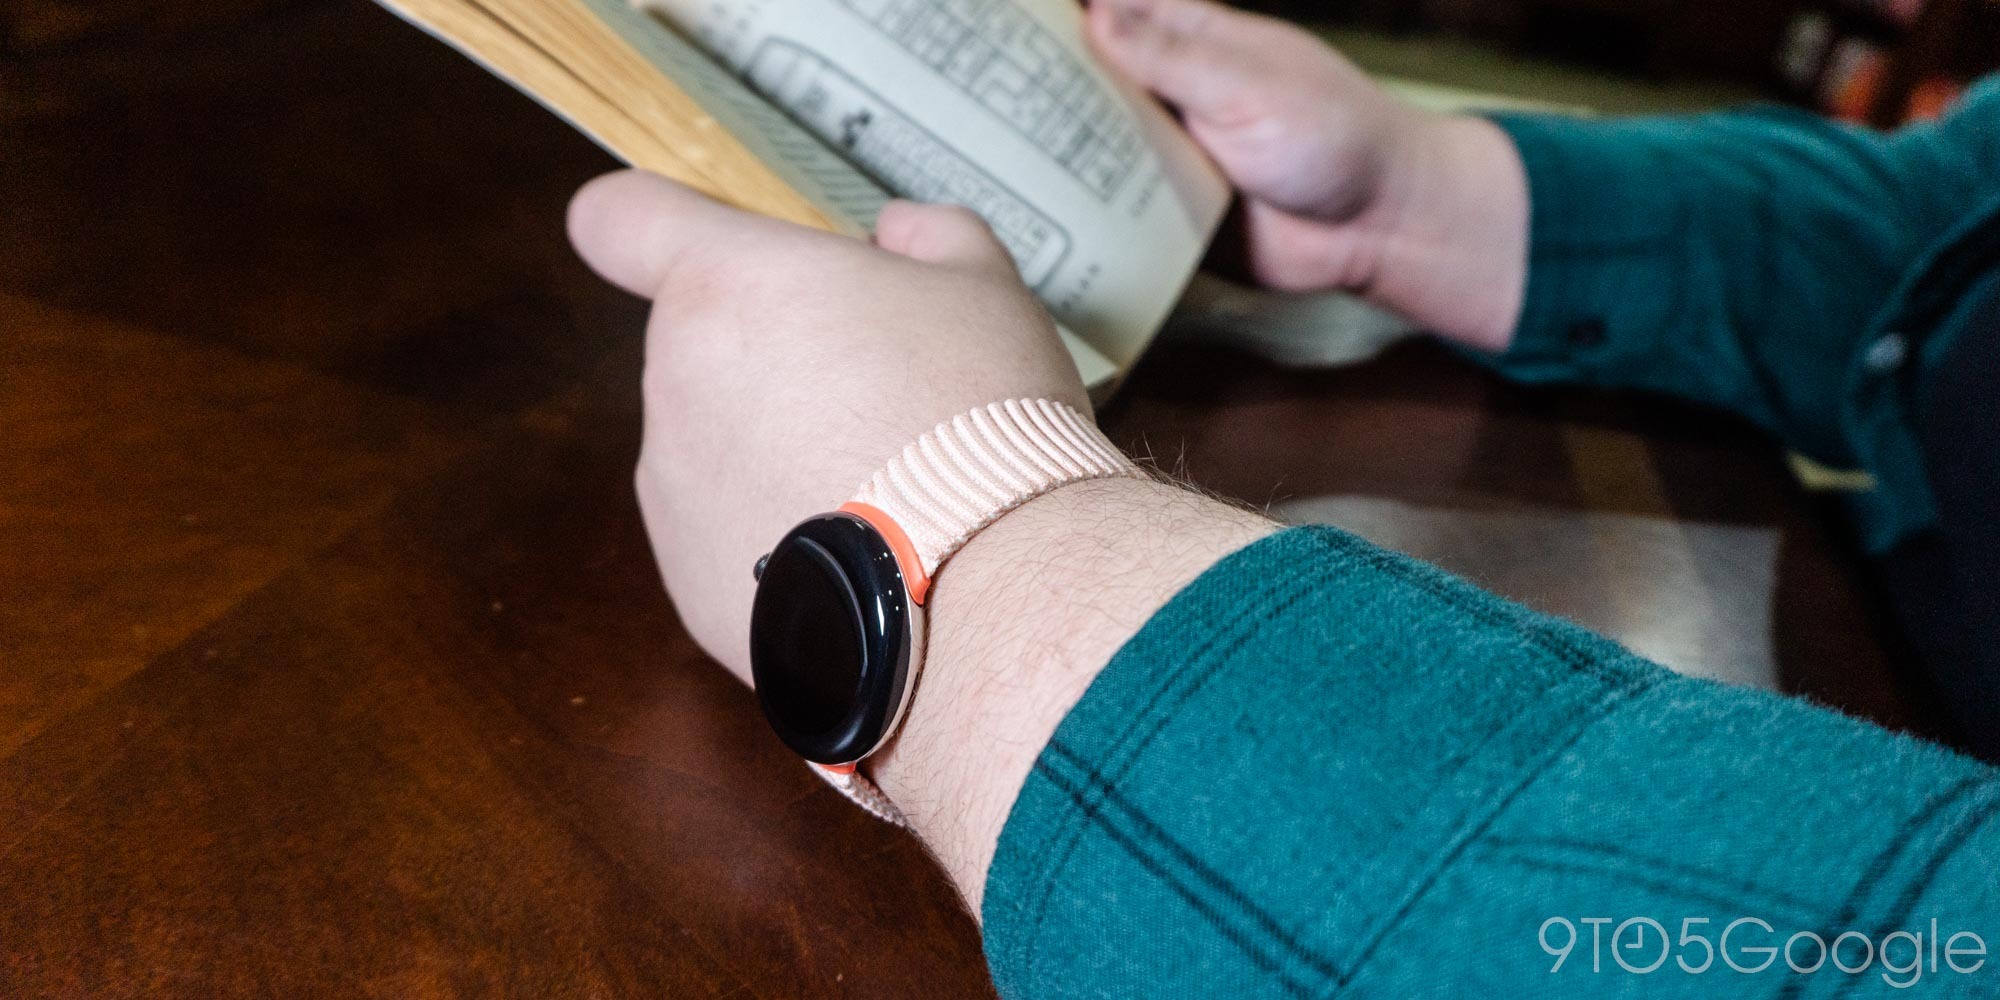 Review: Pixel like cozy Watch is a Band Stretch warm, sweater soft